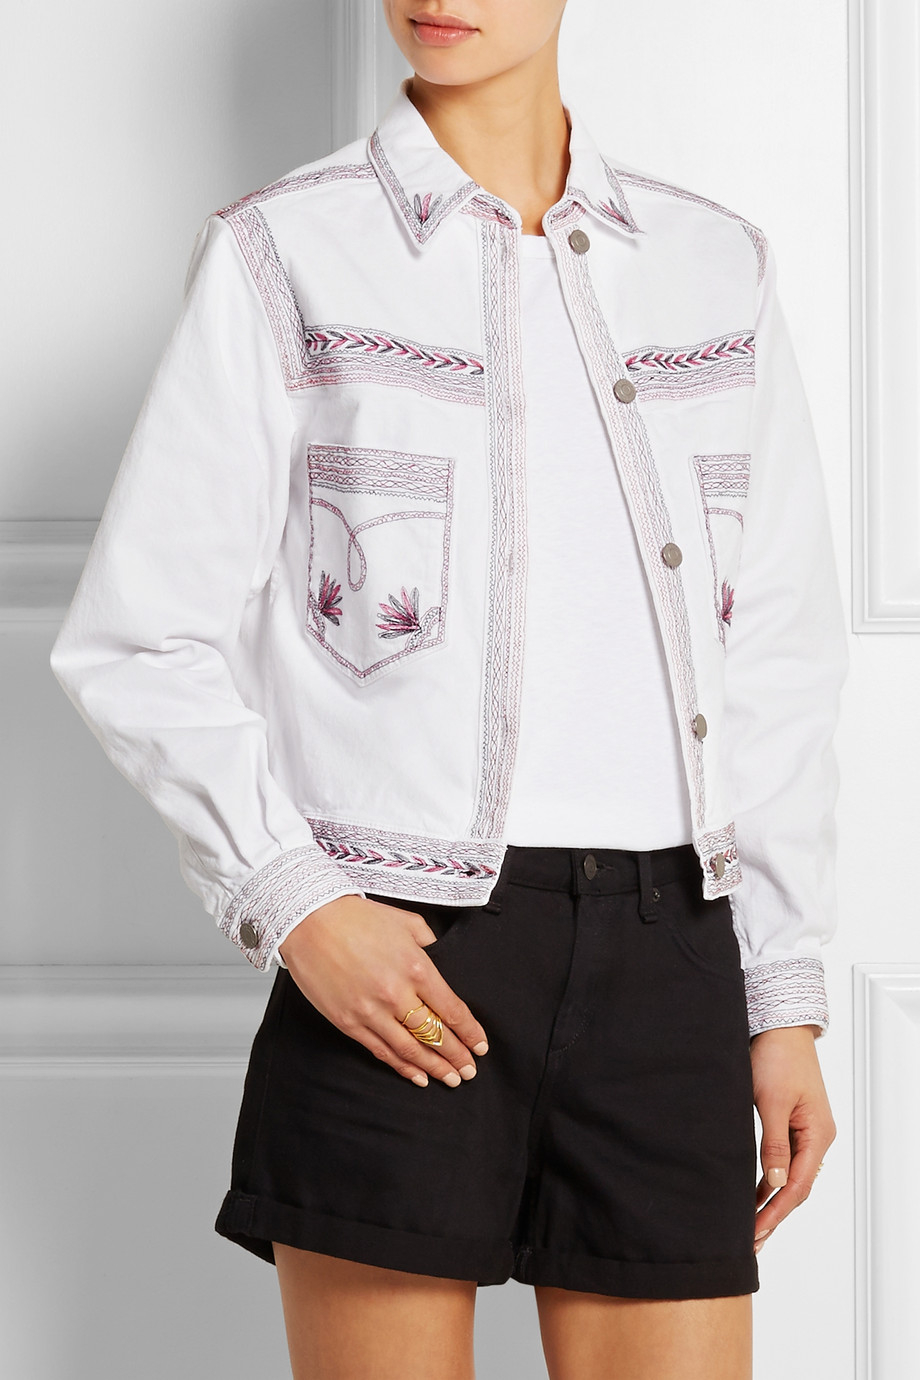 Étoile Isabel Marant Abril Embroidered Stretch-Denim Jacket in White - Lyst